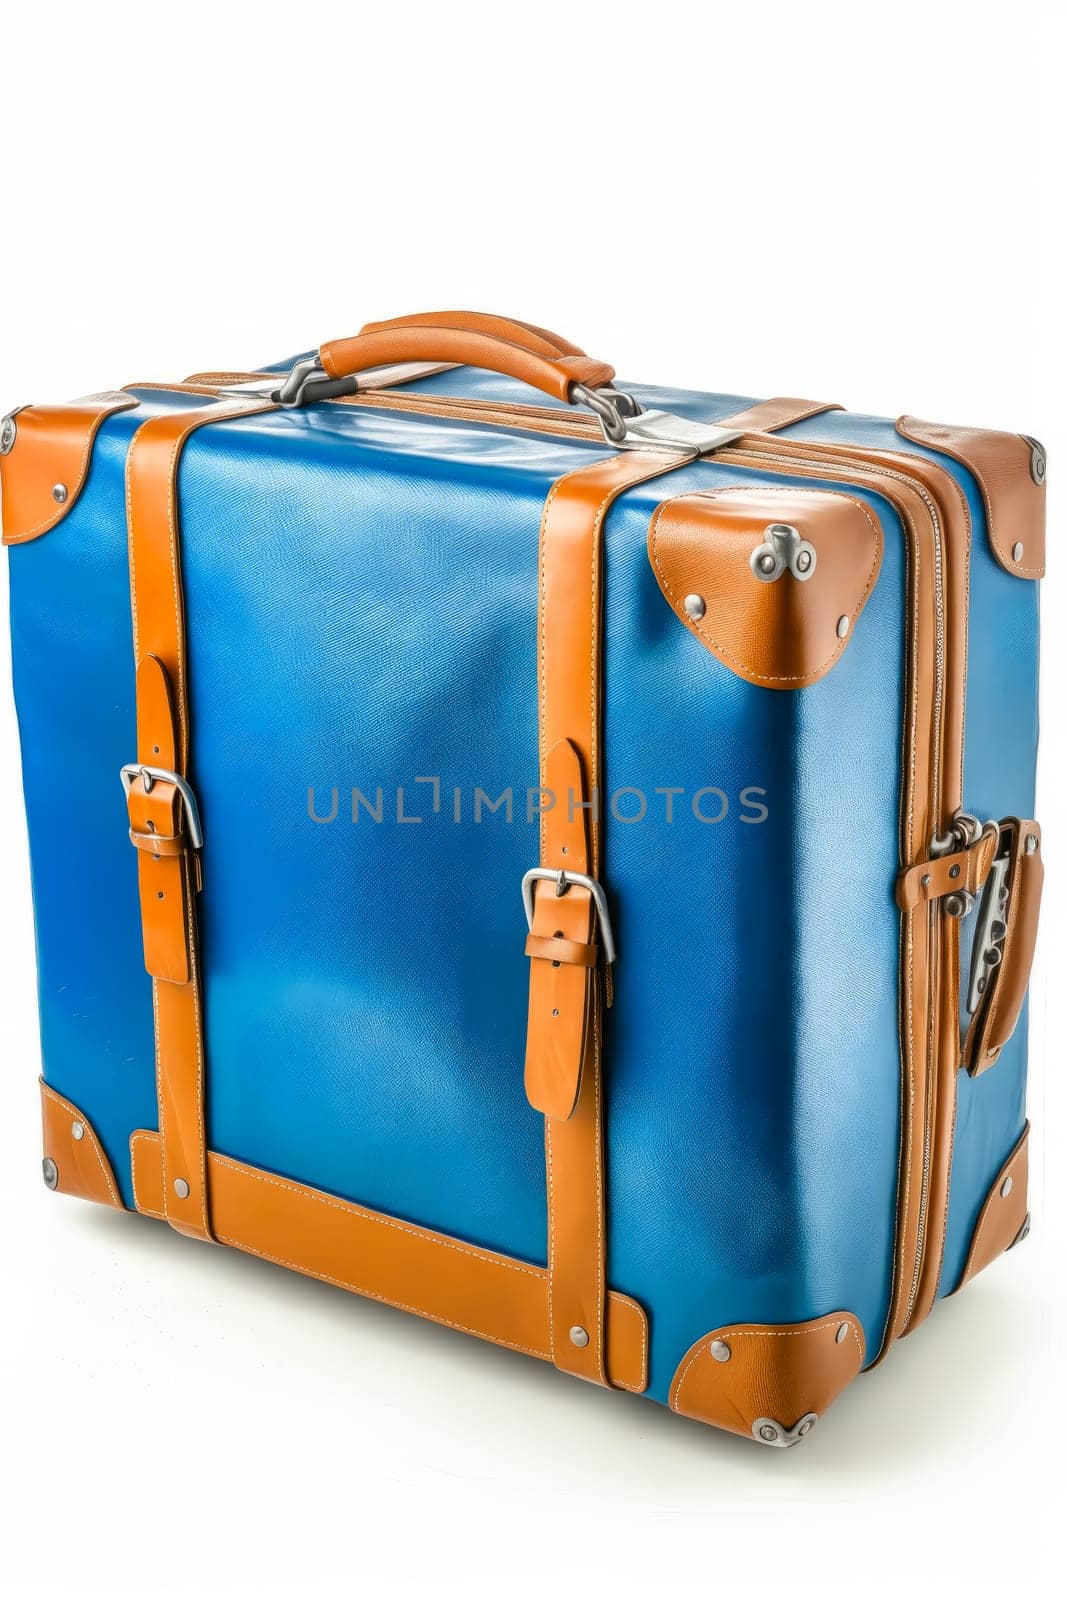 A blue suitcase with brown handles sits on a white background. The suitcase is made of leather and has a gold trim. The brown handles add a touch of elegance. Generative AI